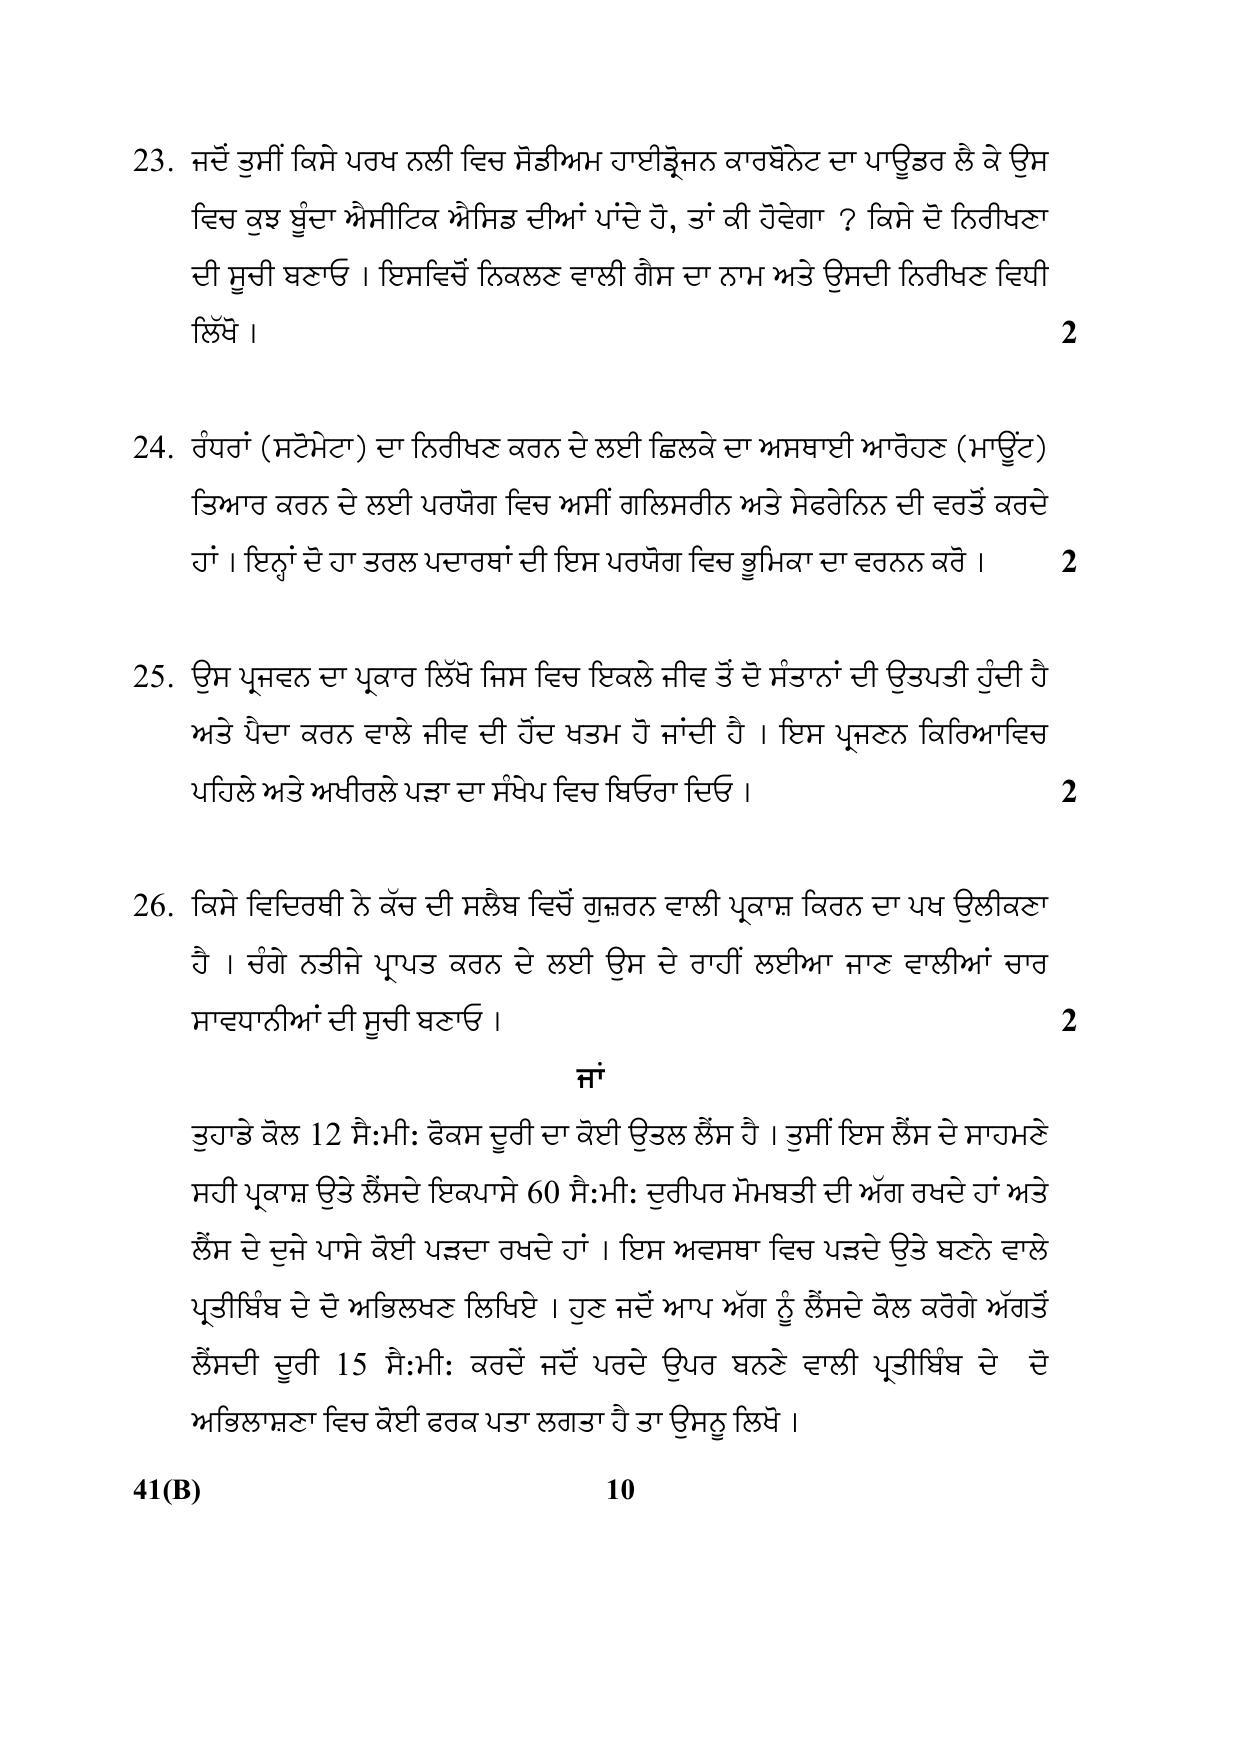 CBSE Class 10 41(B) (Science) For Blind_Punjabi 2018 Question Paper - Page 10